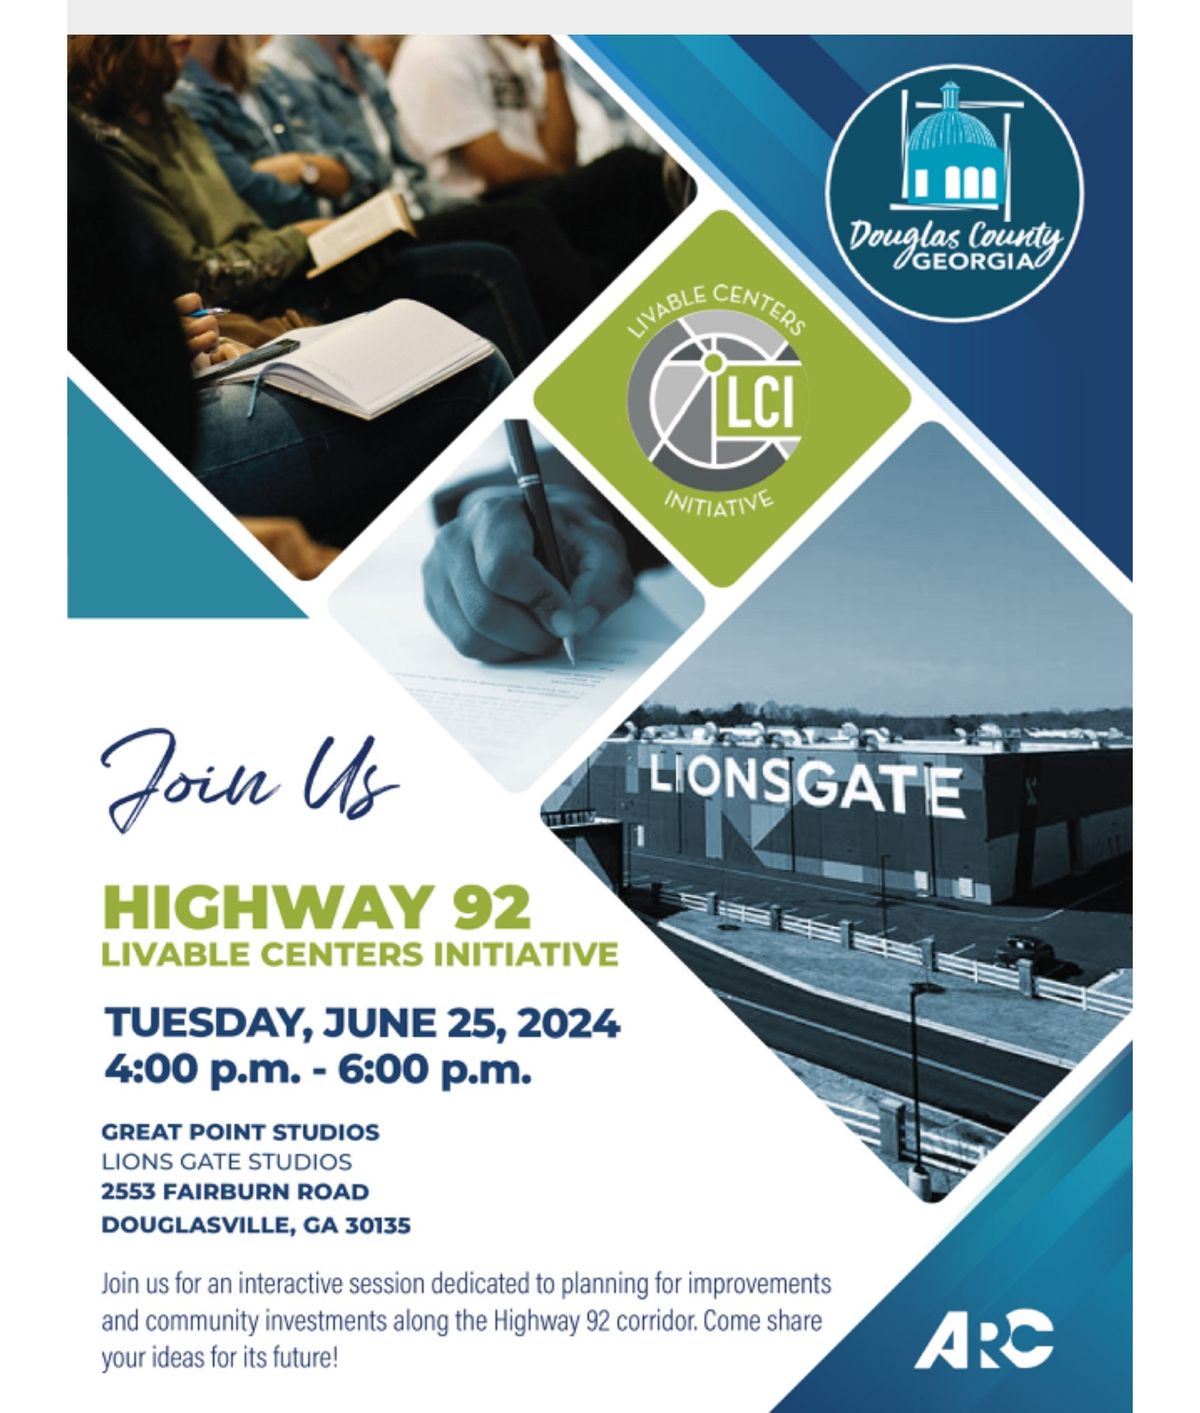 Hwy 92 Livable Centers Initiative Interactive Session